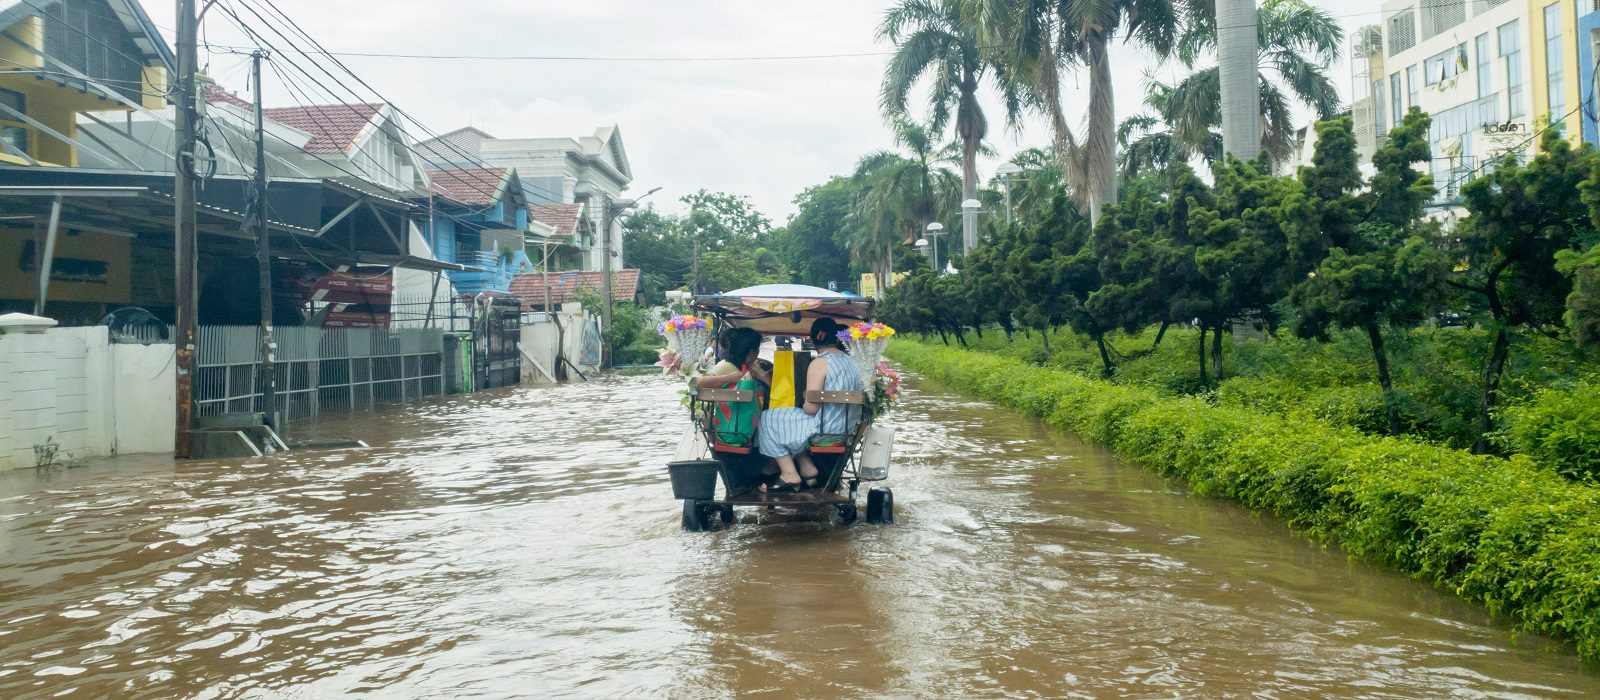 JAKARTA, Indonesia - January 11, 2020: Horse cart crossing the flood while carrying passenger in some residence at Jakarta city